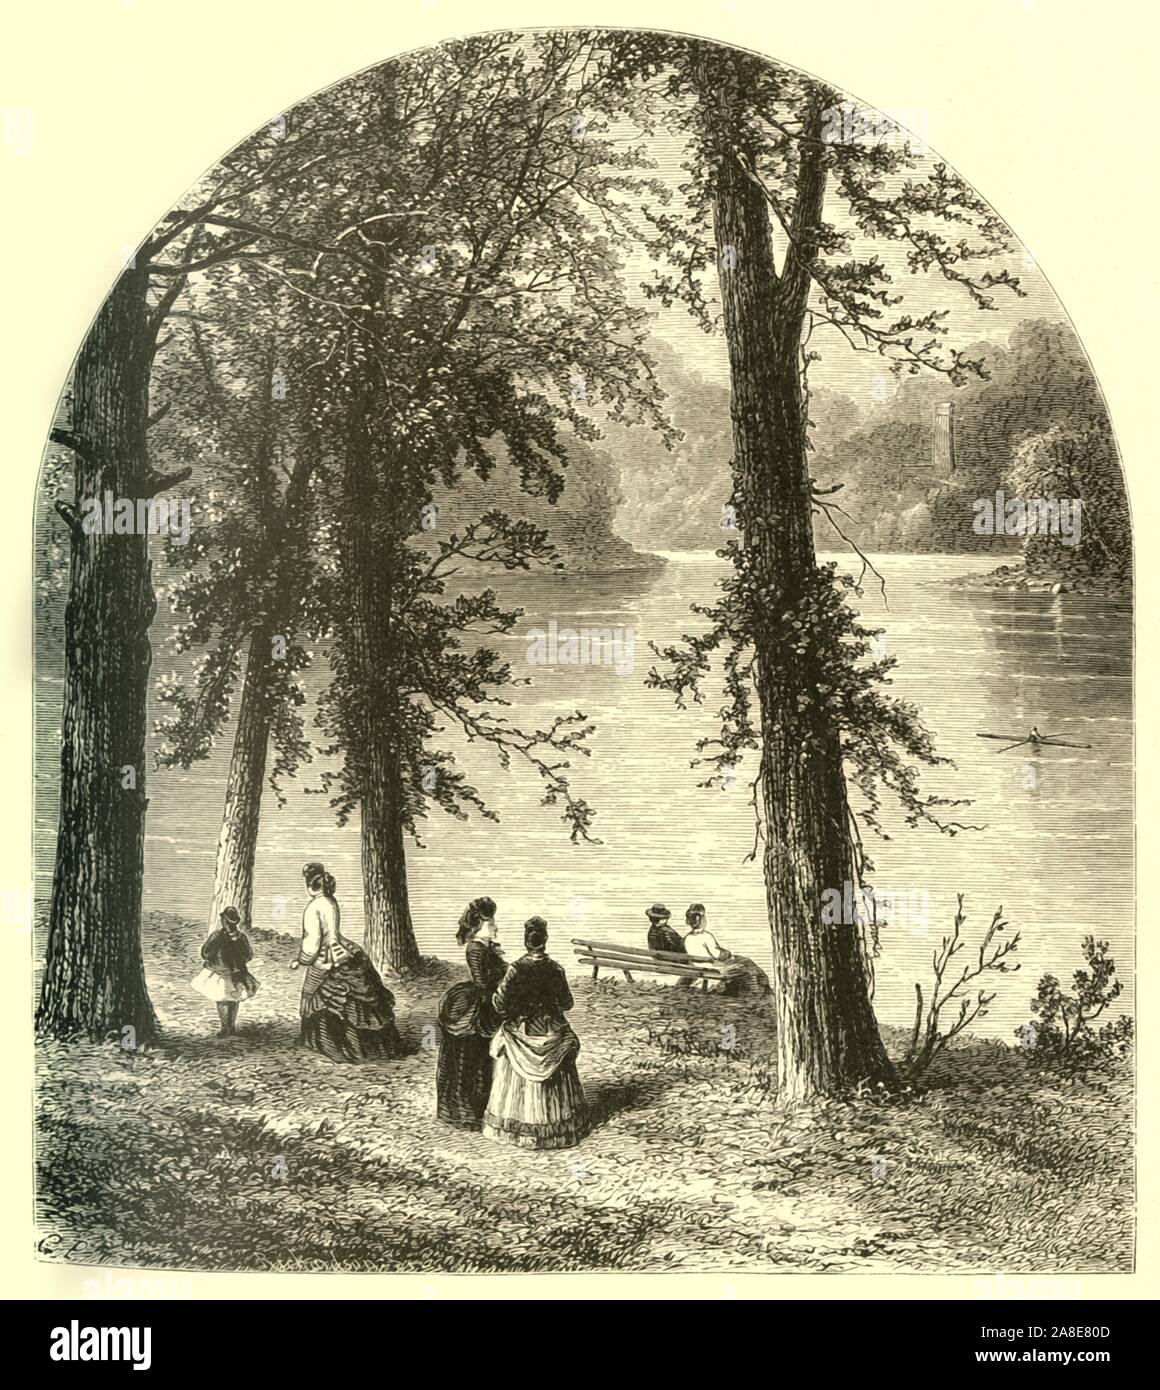 'The Schuylkill - View from Landsdowne', 1874. The River Schuylkill at Lansdowne, Pennsylvania, USA. 'From the heights of Landsdowne there is a wider scope of vision. Seated on the rustic benches, overshadowed by stately trees of almost a primeval growth, the lounger may enjoy one of the most delightful bits of river-scenery of the milder order which our country affords'. From &quot;Picturesque America; or, The Land We Live In, A Delineation by Pen and Pencil of the Mountains, Rivers, Lakes...with Illustrations on Steel and Wood by Eminent American Artists&quot; Vol. II, edited by William Cull Stock Photo